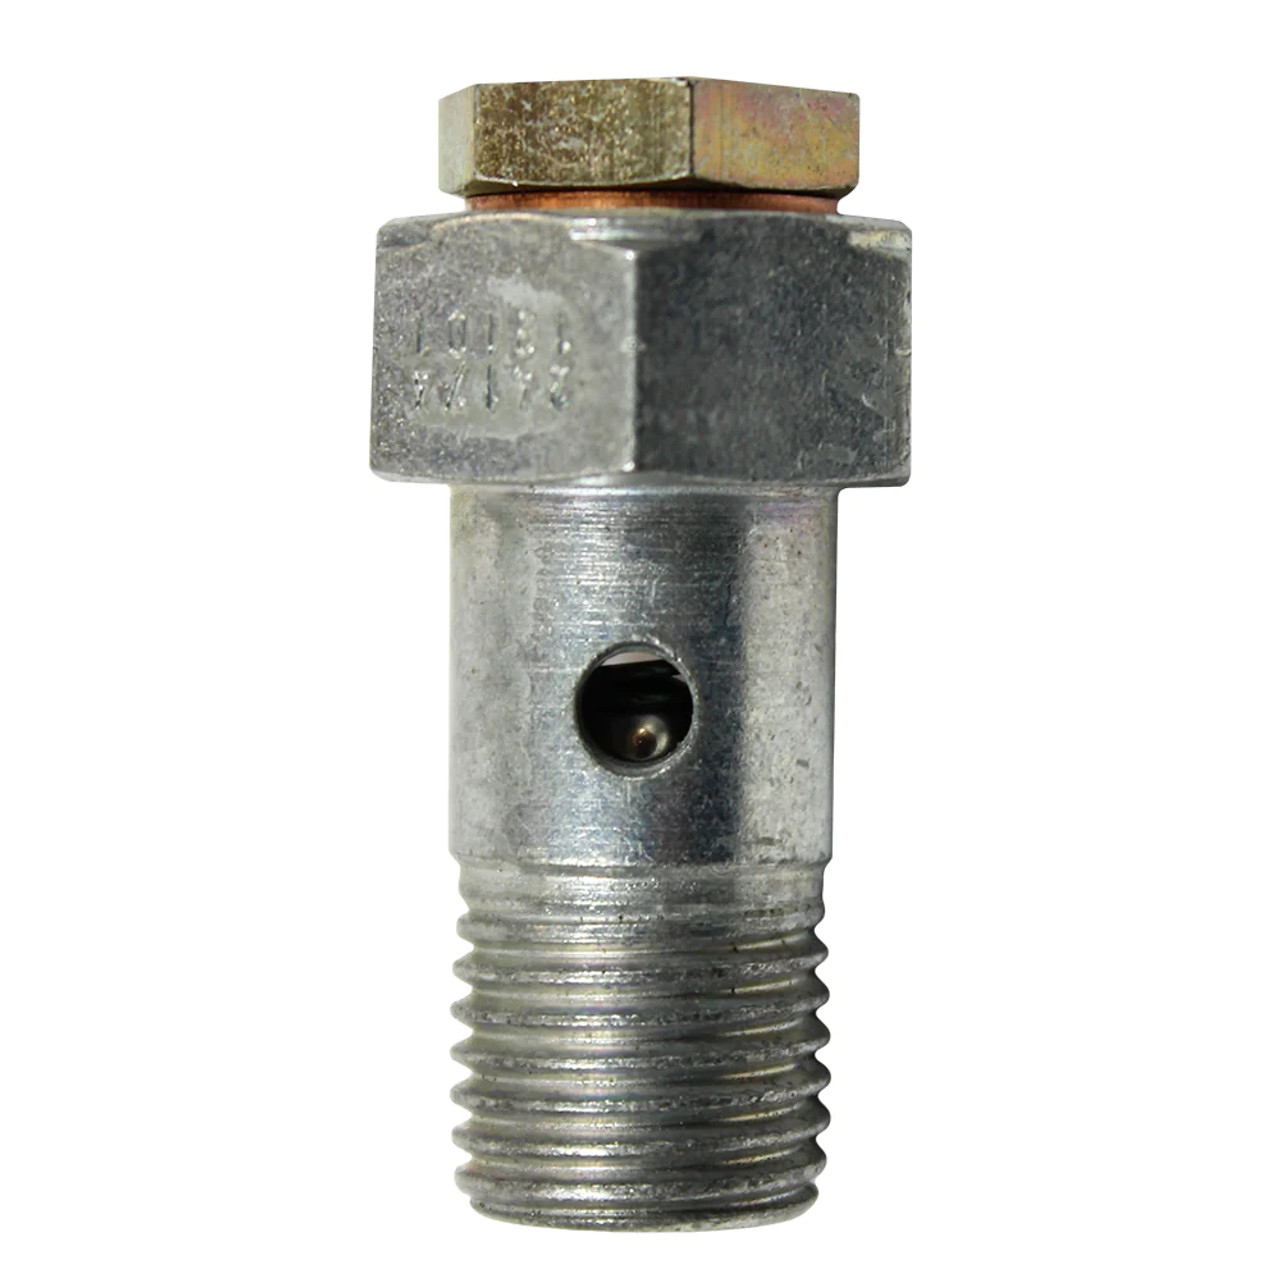 DDP Valve OEM OverFLOW Valve for 1994 to 1998 Dodge 5.9L Cummins (DDP.OVERFLOW)

Your store is not eligible for the new catalog experience